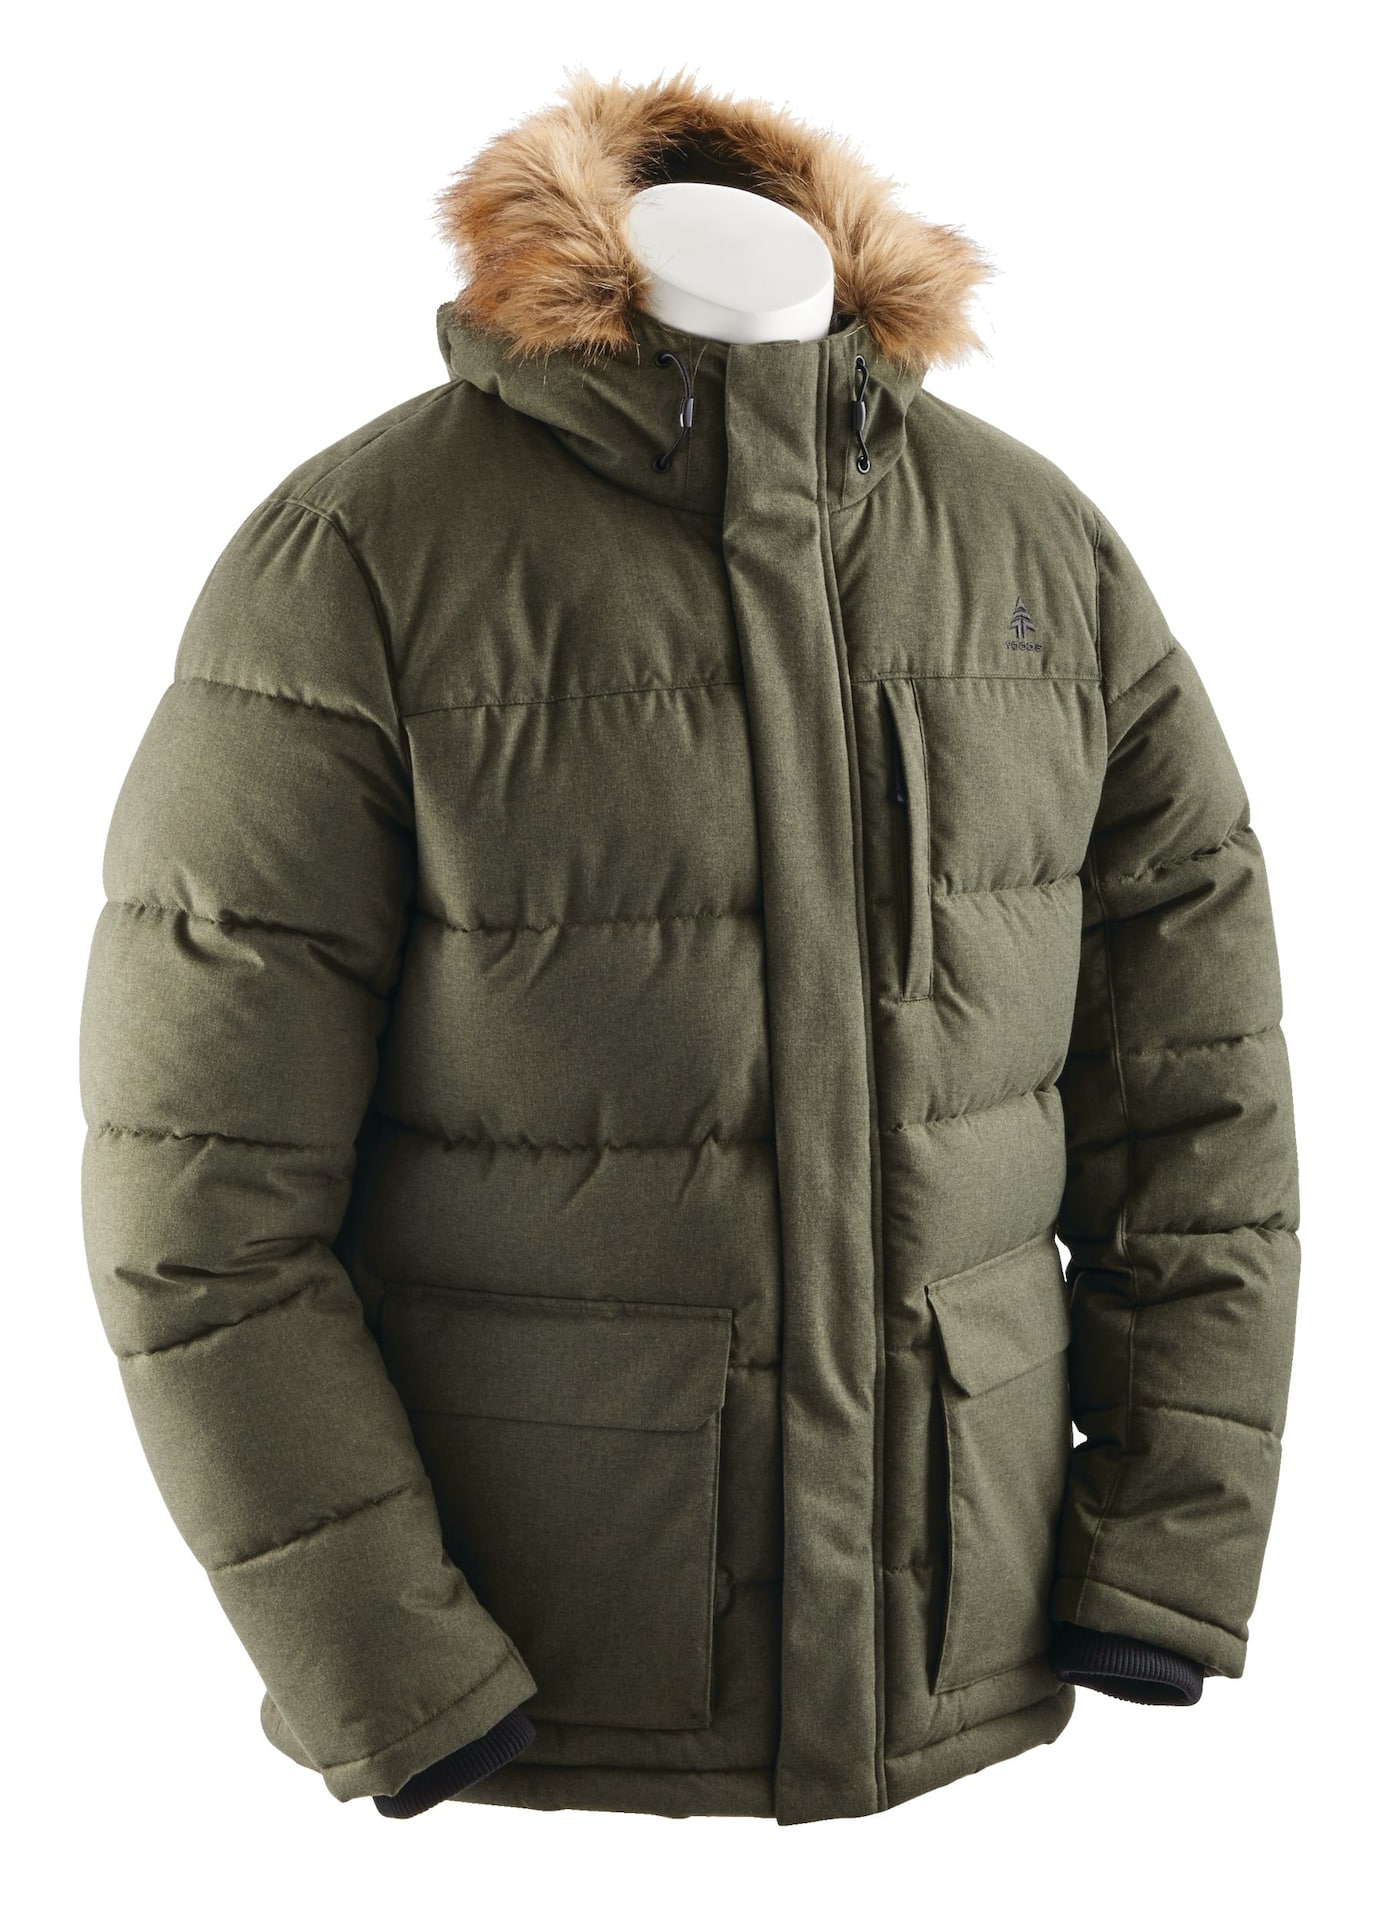 Canadian Tire - Get a great deal on this Woods Pierce Insulated Parka Jacket,  up to 60% off! Click here to for details and to check stock:  http://www.canadiantire.ca/en/pdp/woods-pierce-insulated-parka-jacket-men-s-green-1870664p.html  | Facebook